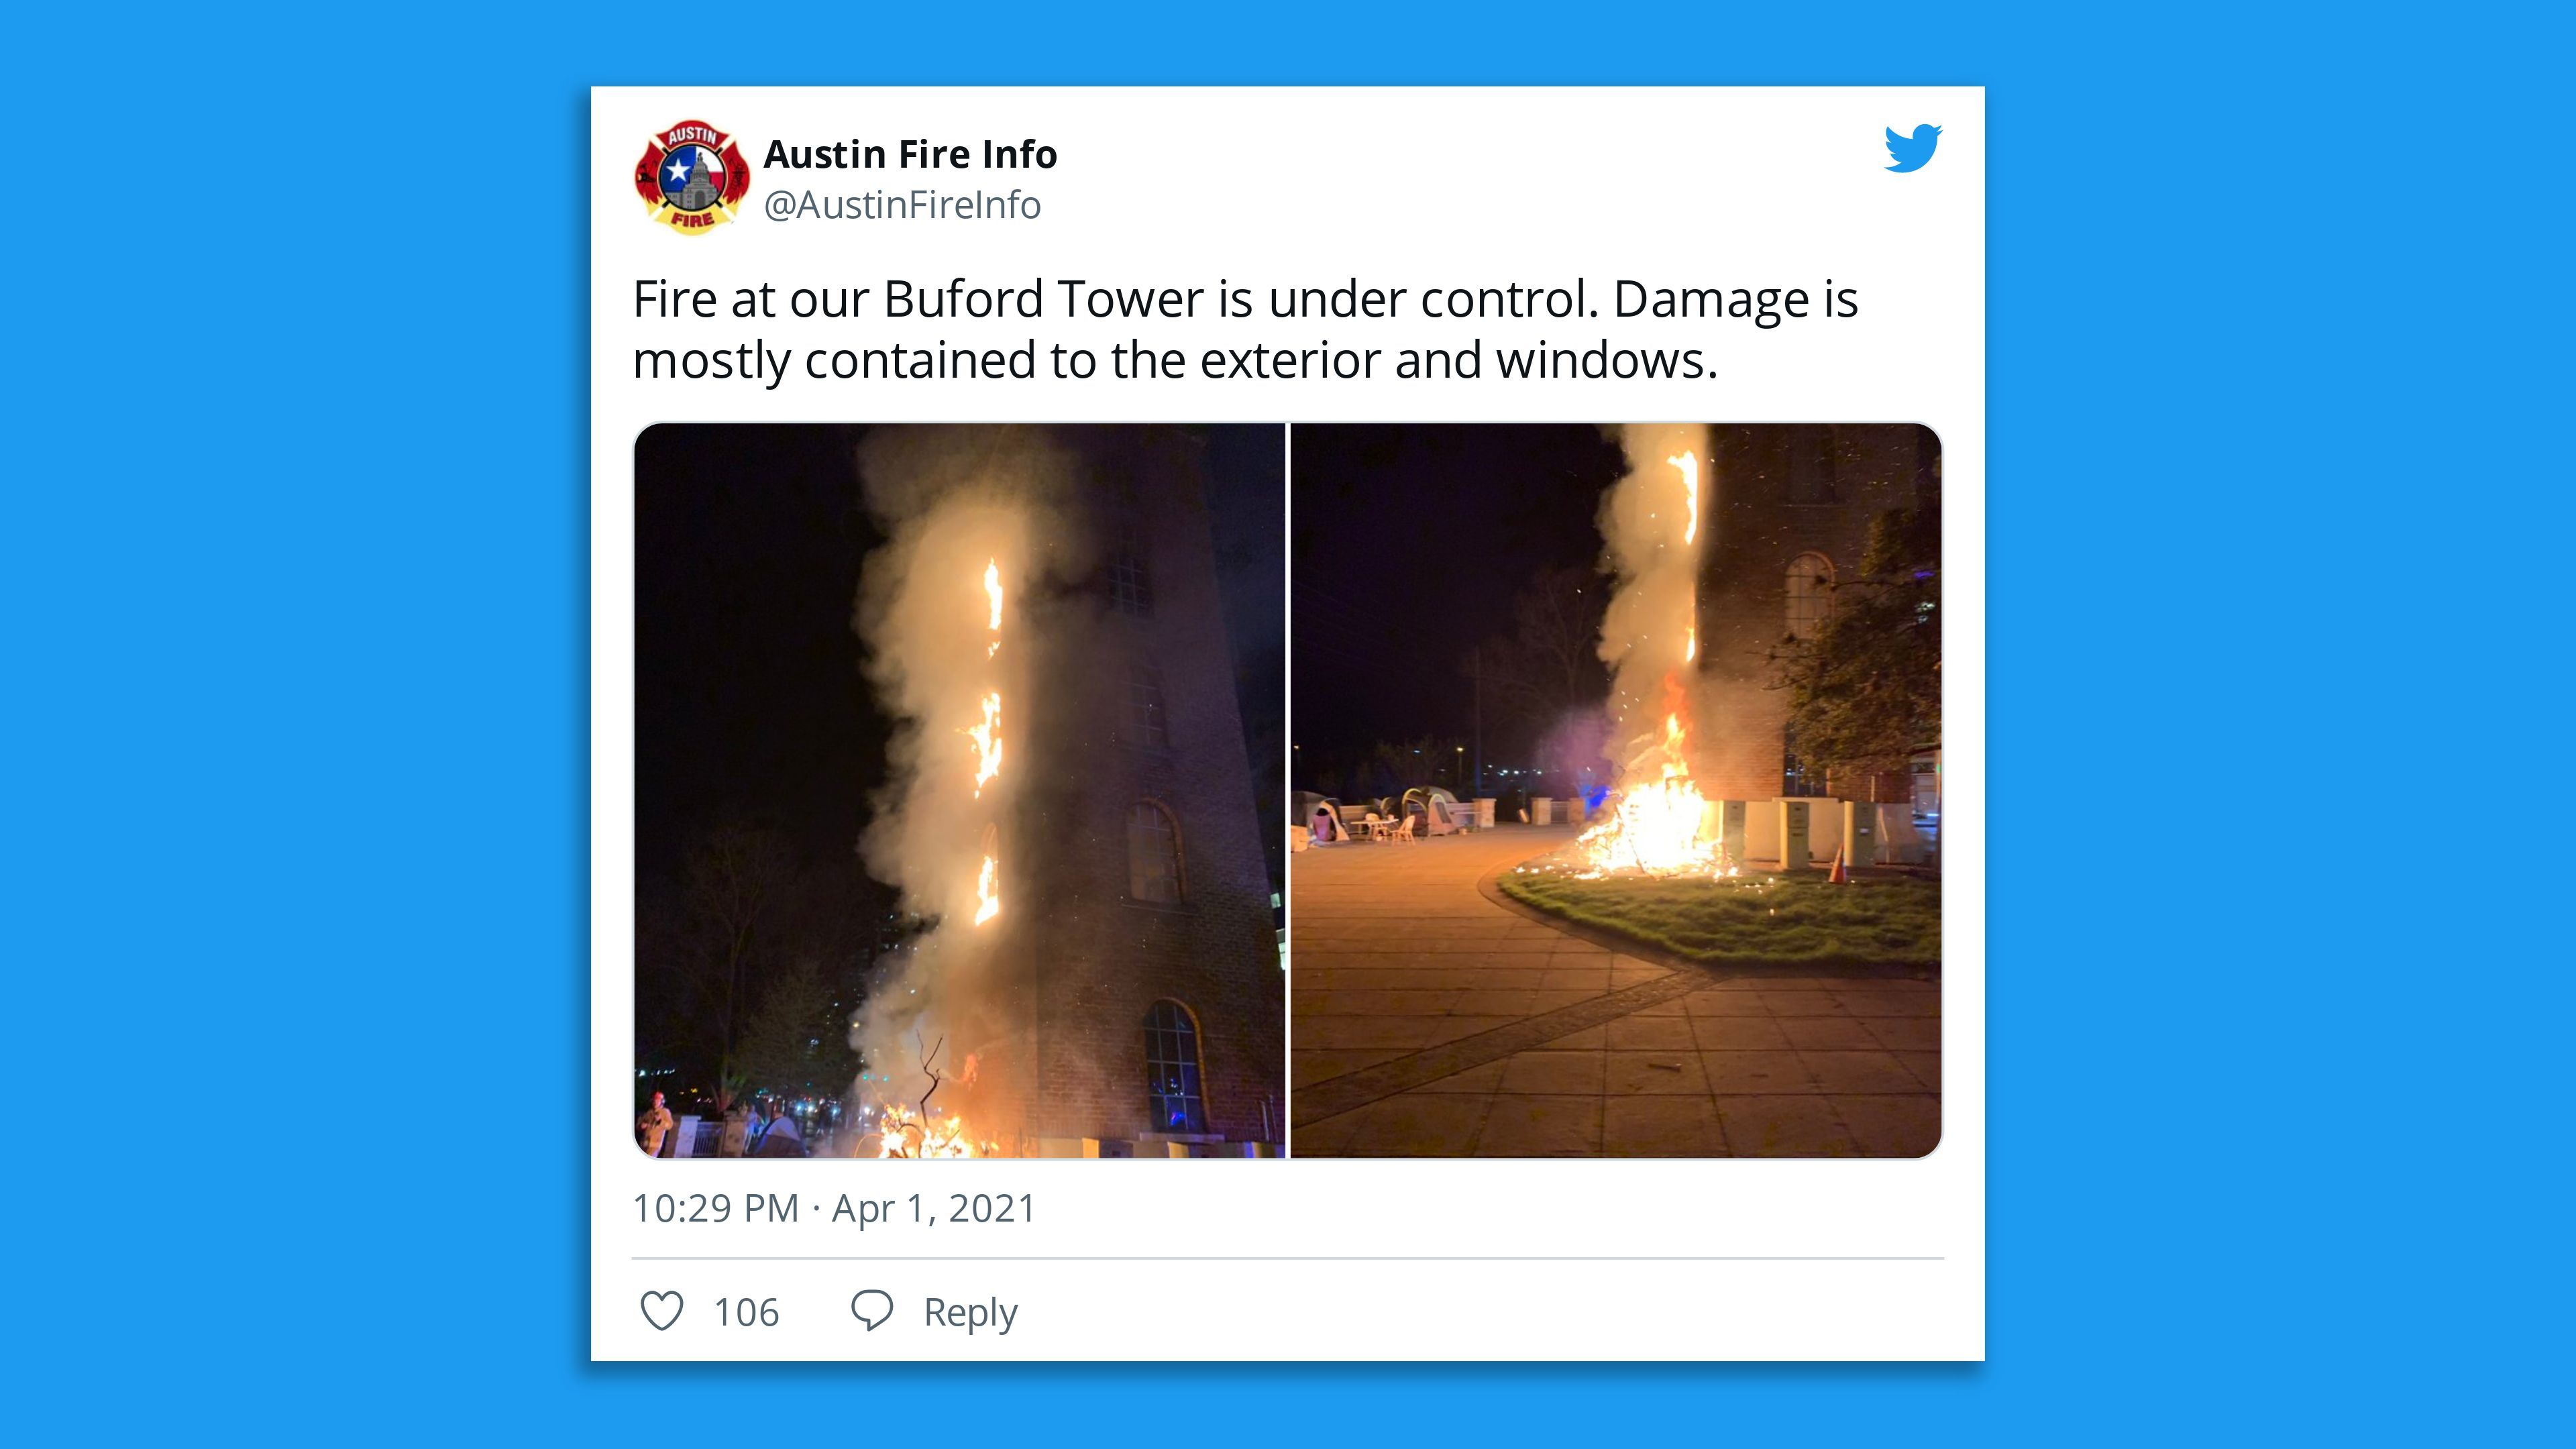 A tweet from the Burning Buford Tower.